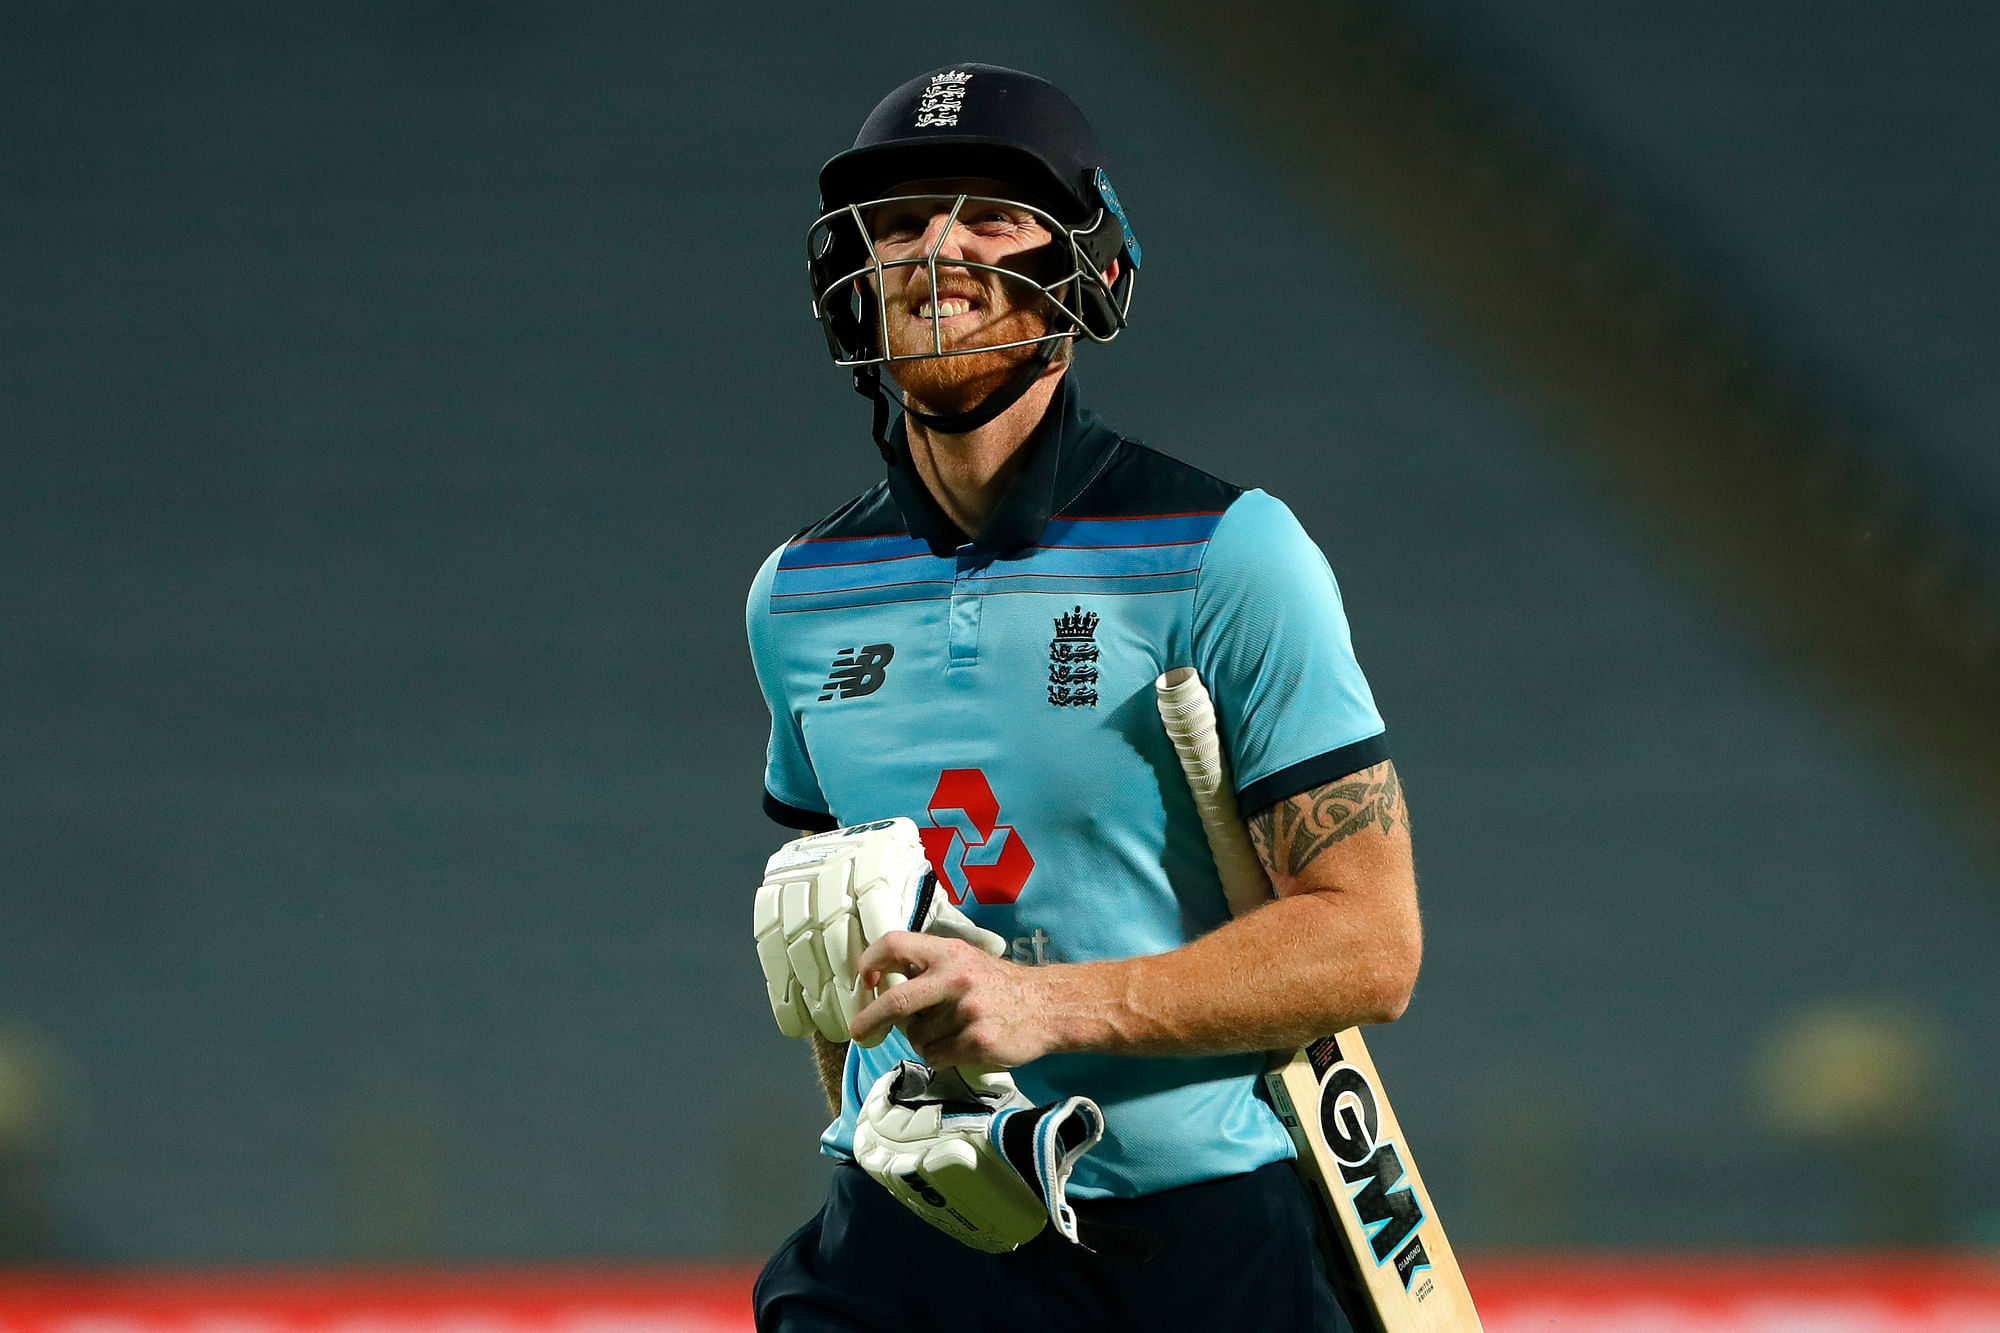 Ben Stokes of England during the 2nd One Day International match between India and England held at the Maharashtra Cricket Association Stadium, Pune, India on the 26th March 2021